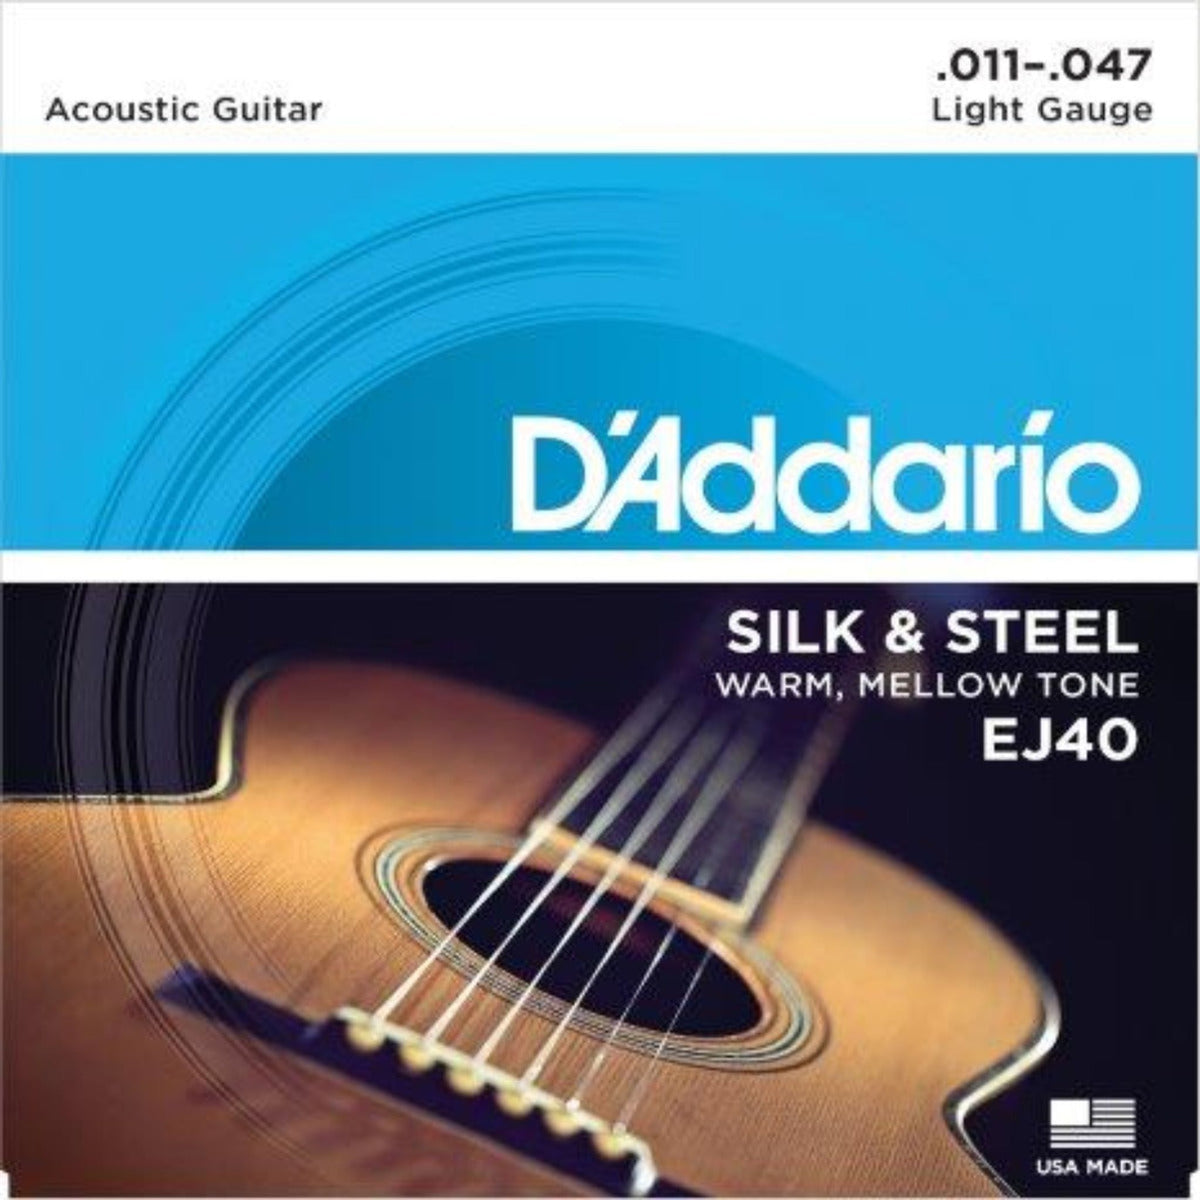 EJ40 Silk &amp; Steel strings are designed and gauged specifically for guitarists who use traditional fingerstyle methods and prefer a warm, mellow tone. 